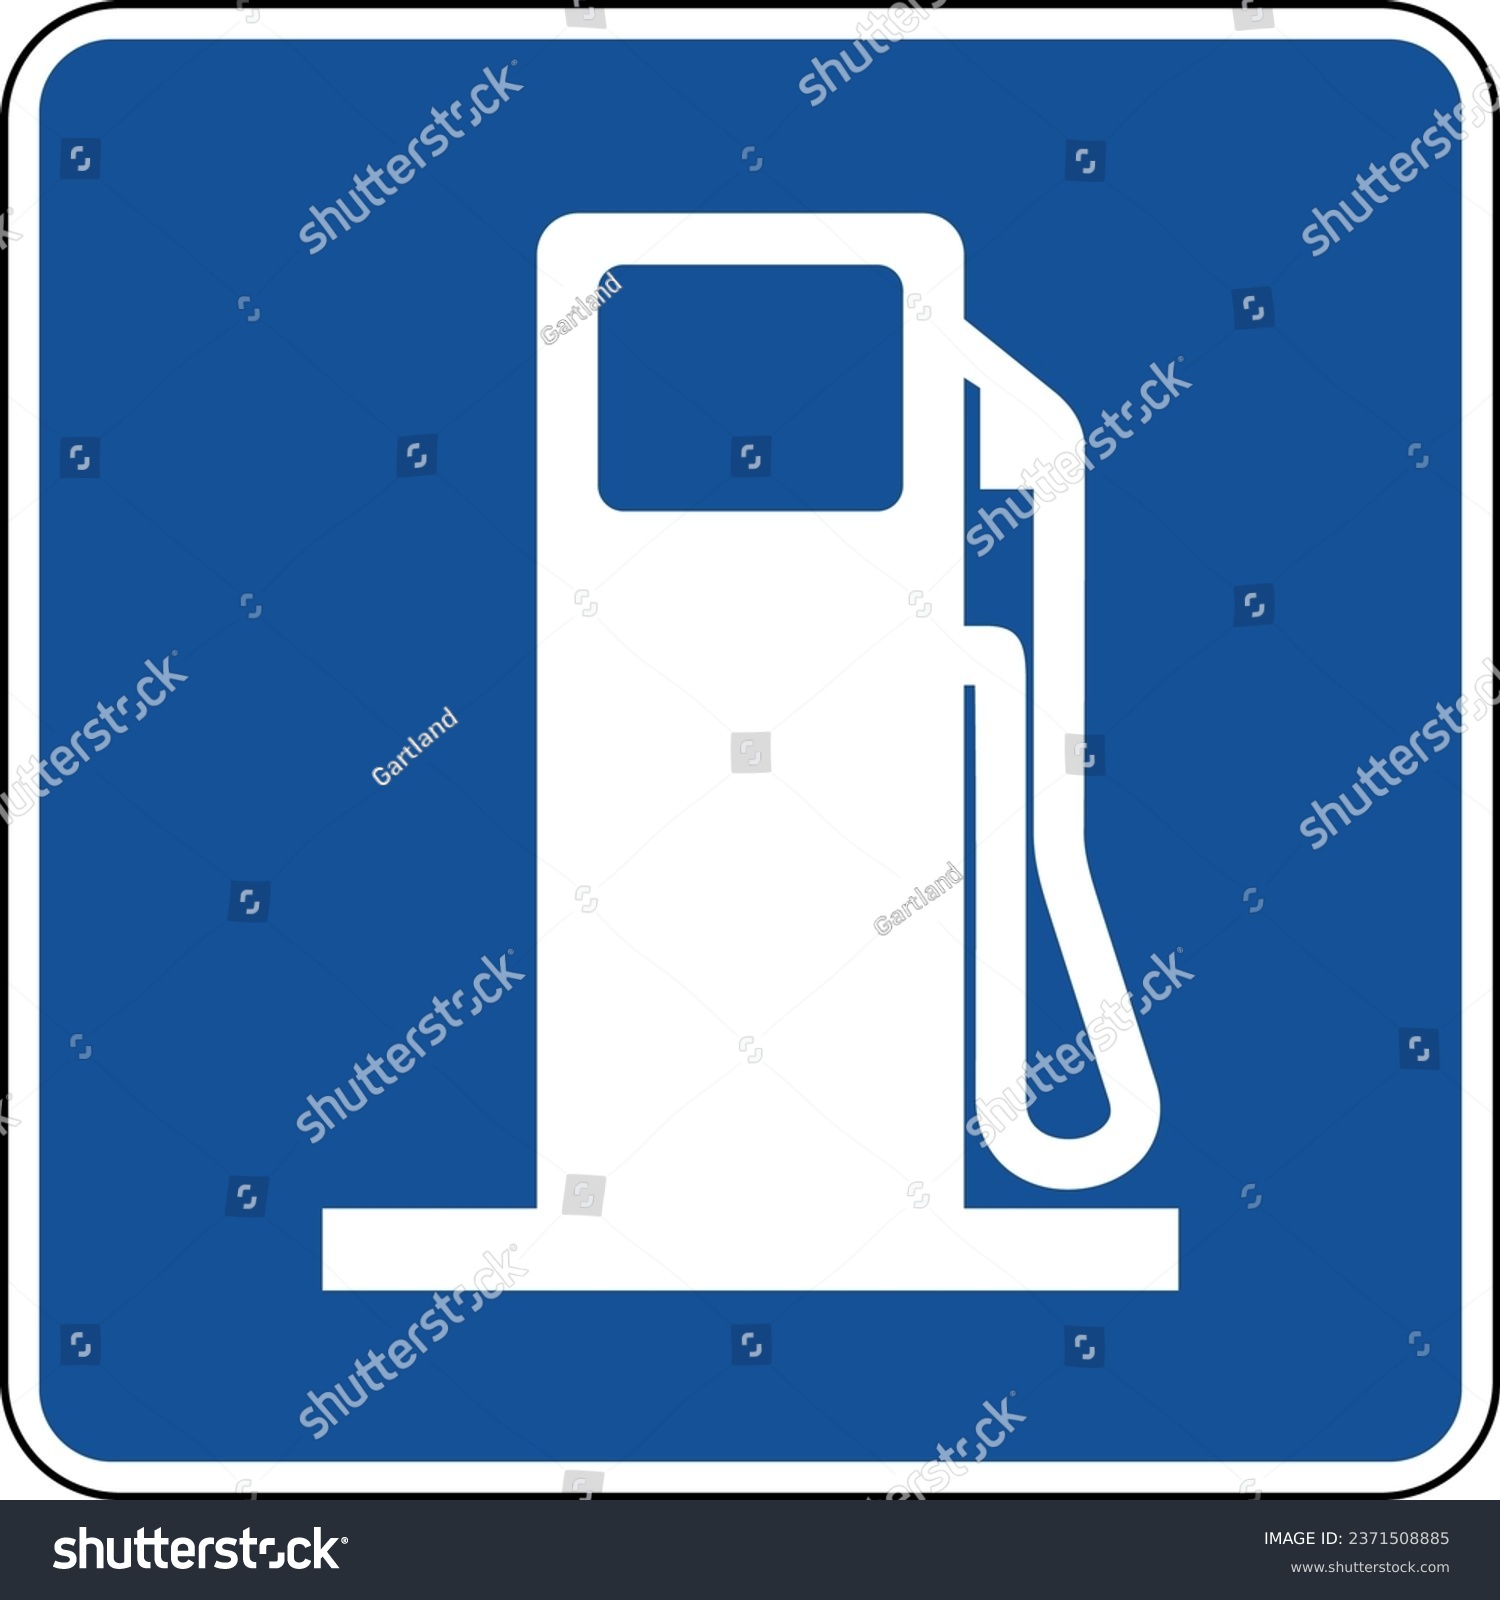 SVG of Vector graphic of a blue usa gas mutcd highway sign. It consists of a silhouette of a gas pump contained in a blue square svg